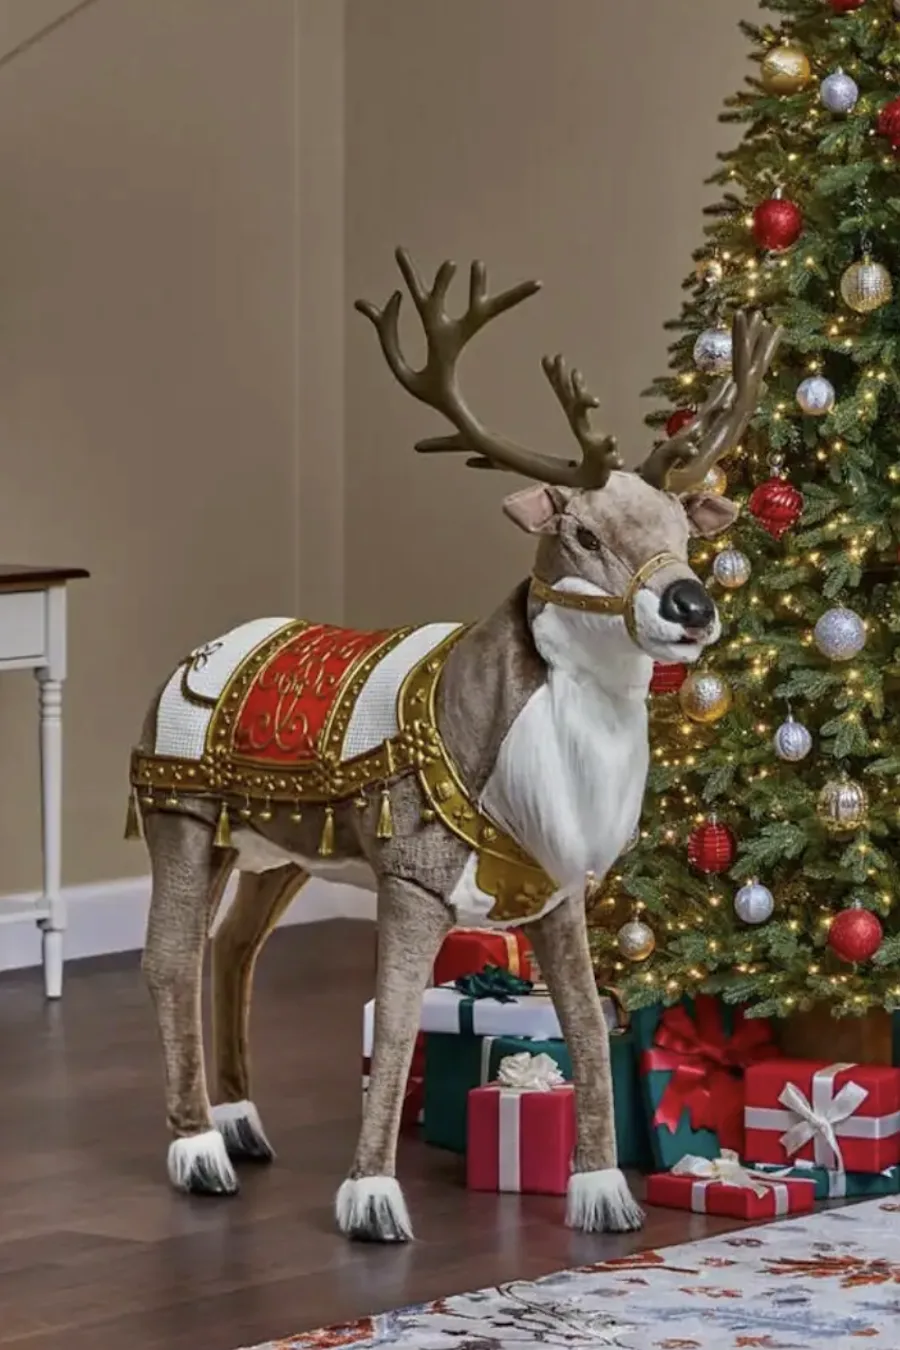 Home Depot is Selling A 4-Foot Animated Reindeer That Dances to ...